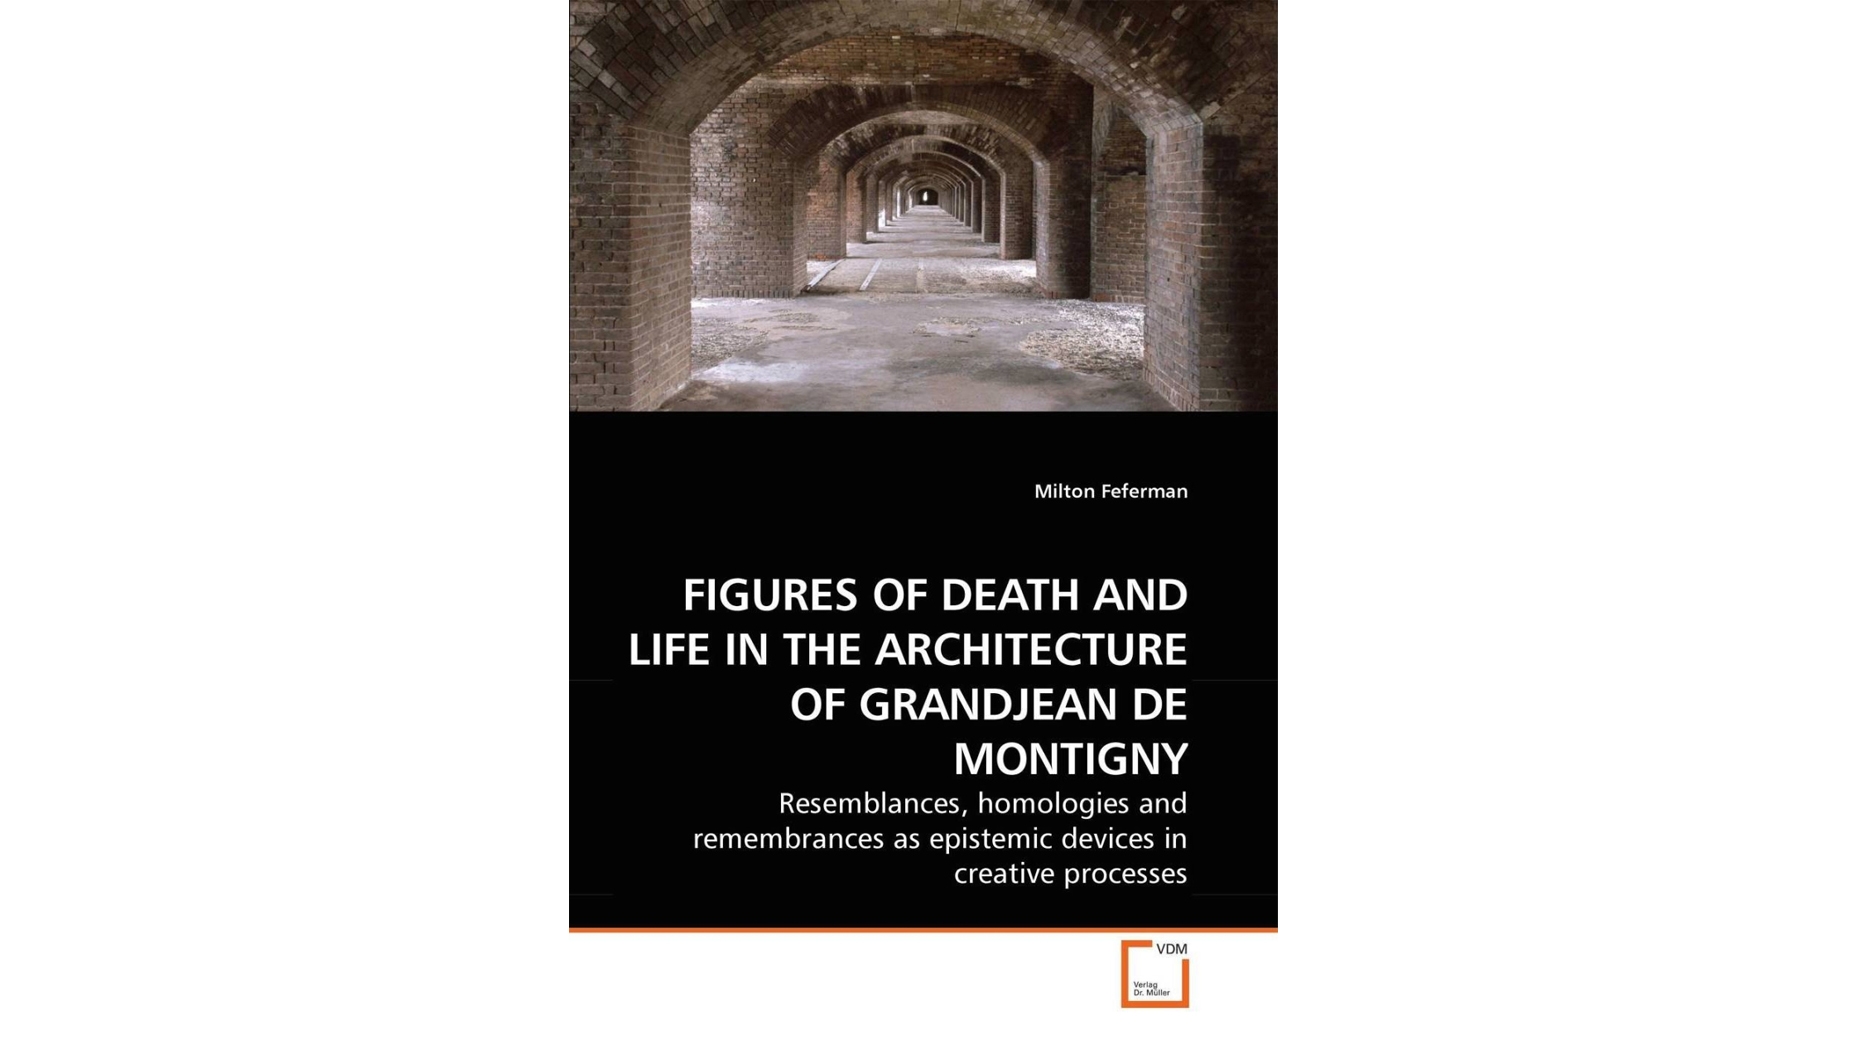 Figures of Death and Life in the Architecture of Grandjean de Montigny book cover